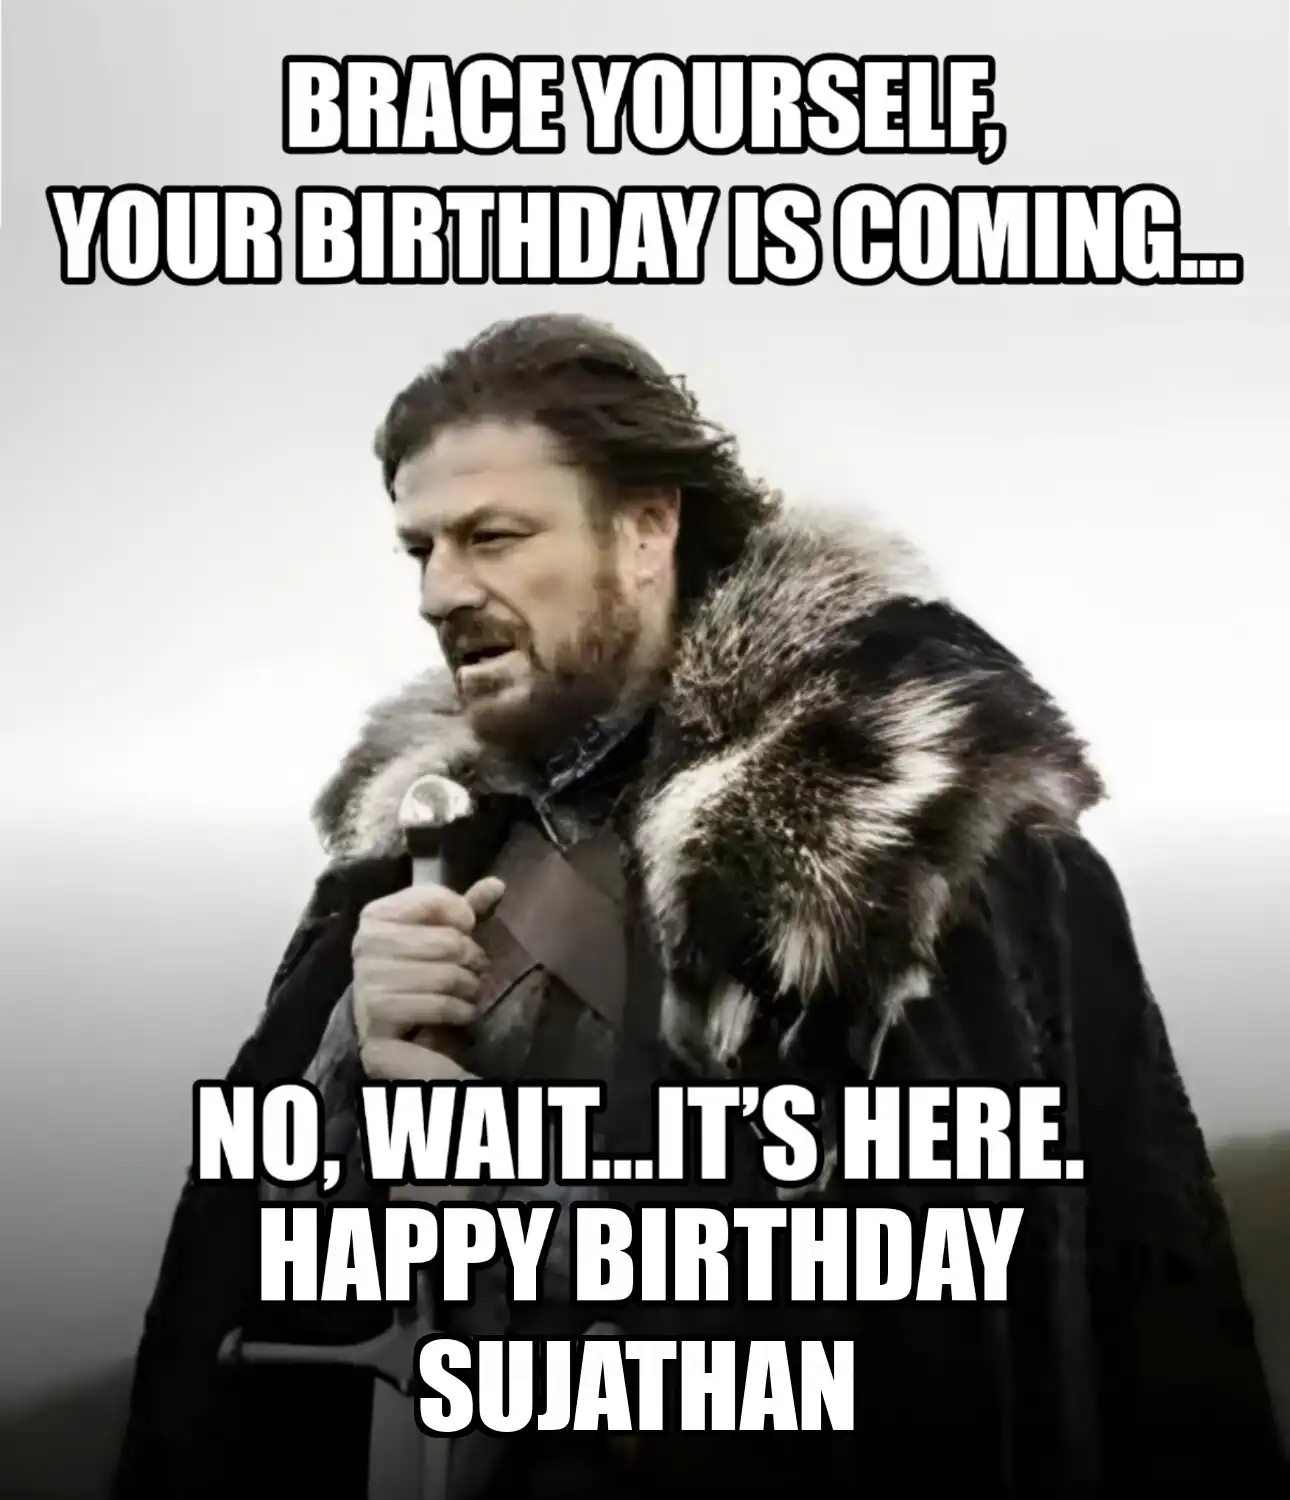 Happy Birthday Sujathan Brace Yourself Your Birthday Is Coming Meme